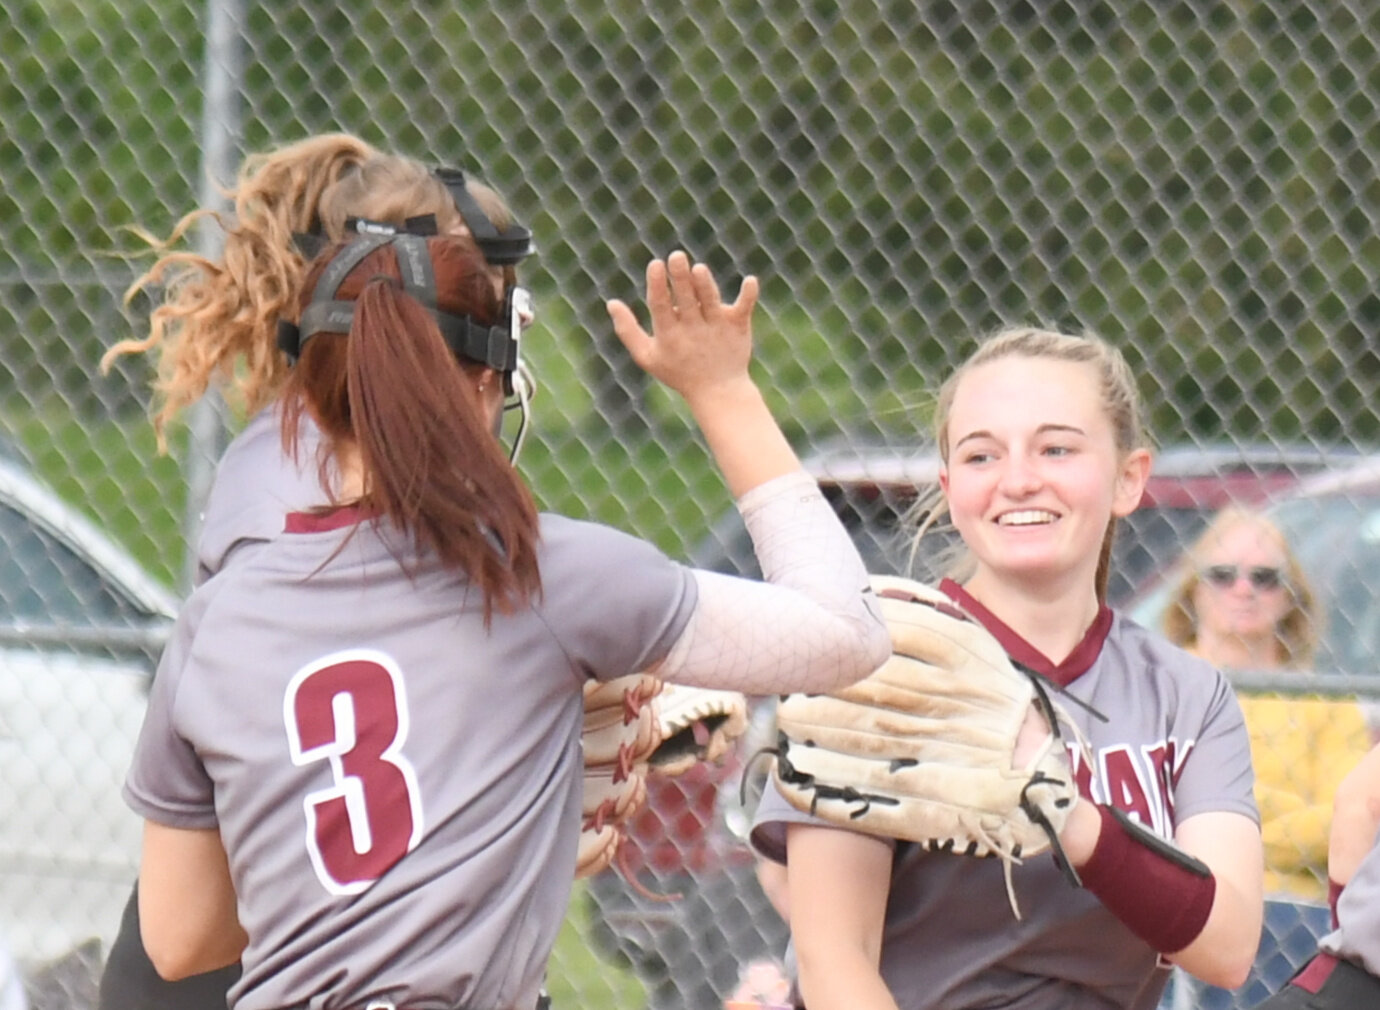 Kyla Zabek celebrates a big out for Oriskany on Friday against Poland. Oriskany won the game 3-2 in seven innings.